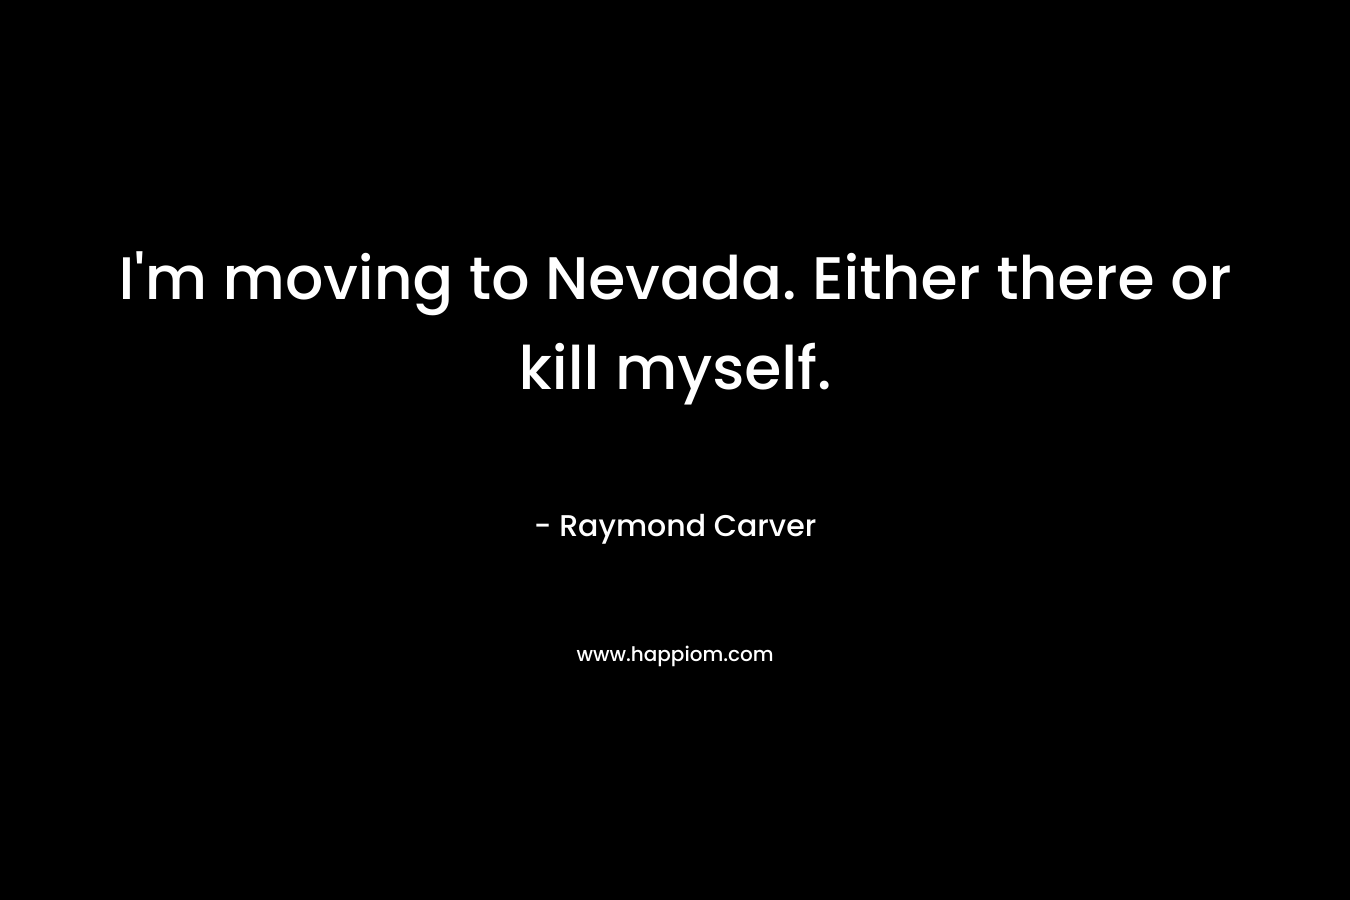 I’m moving to Nevada. Either there or kill myself. – Raymond Carver